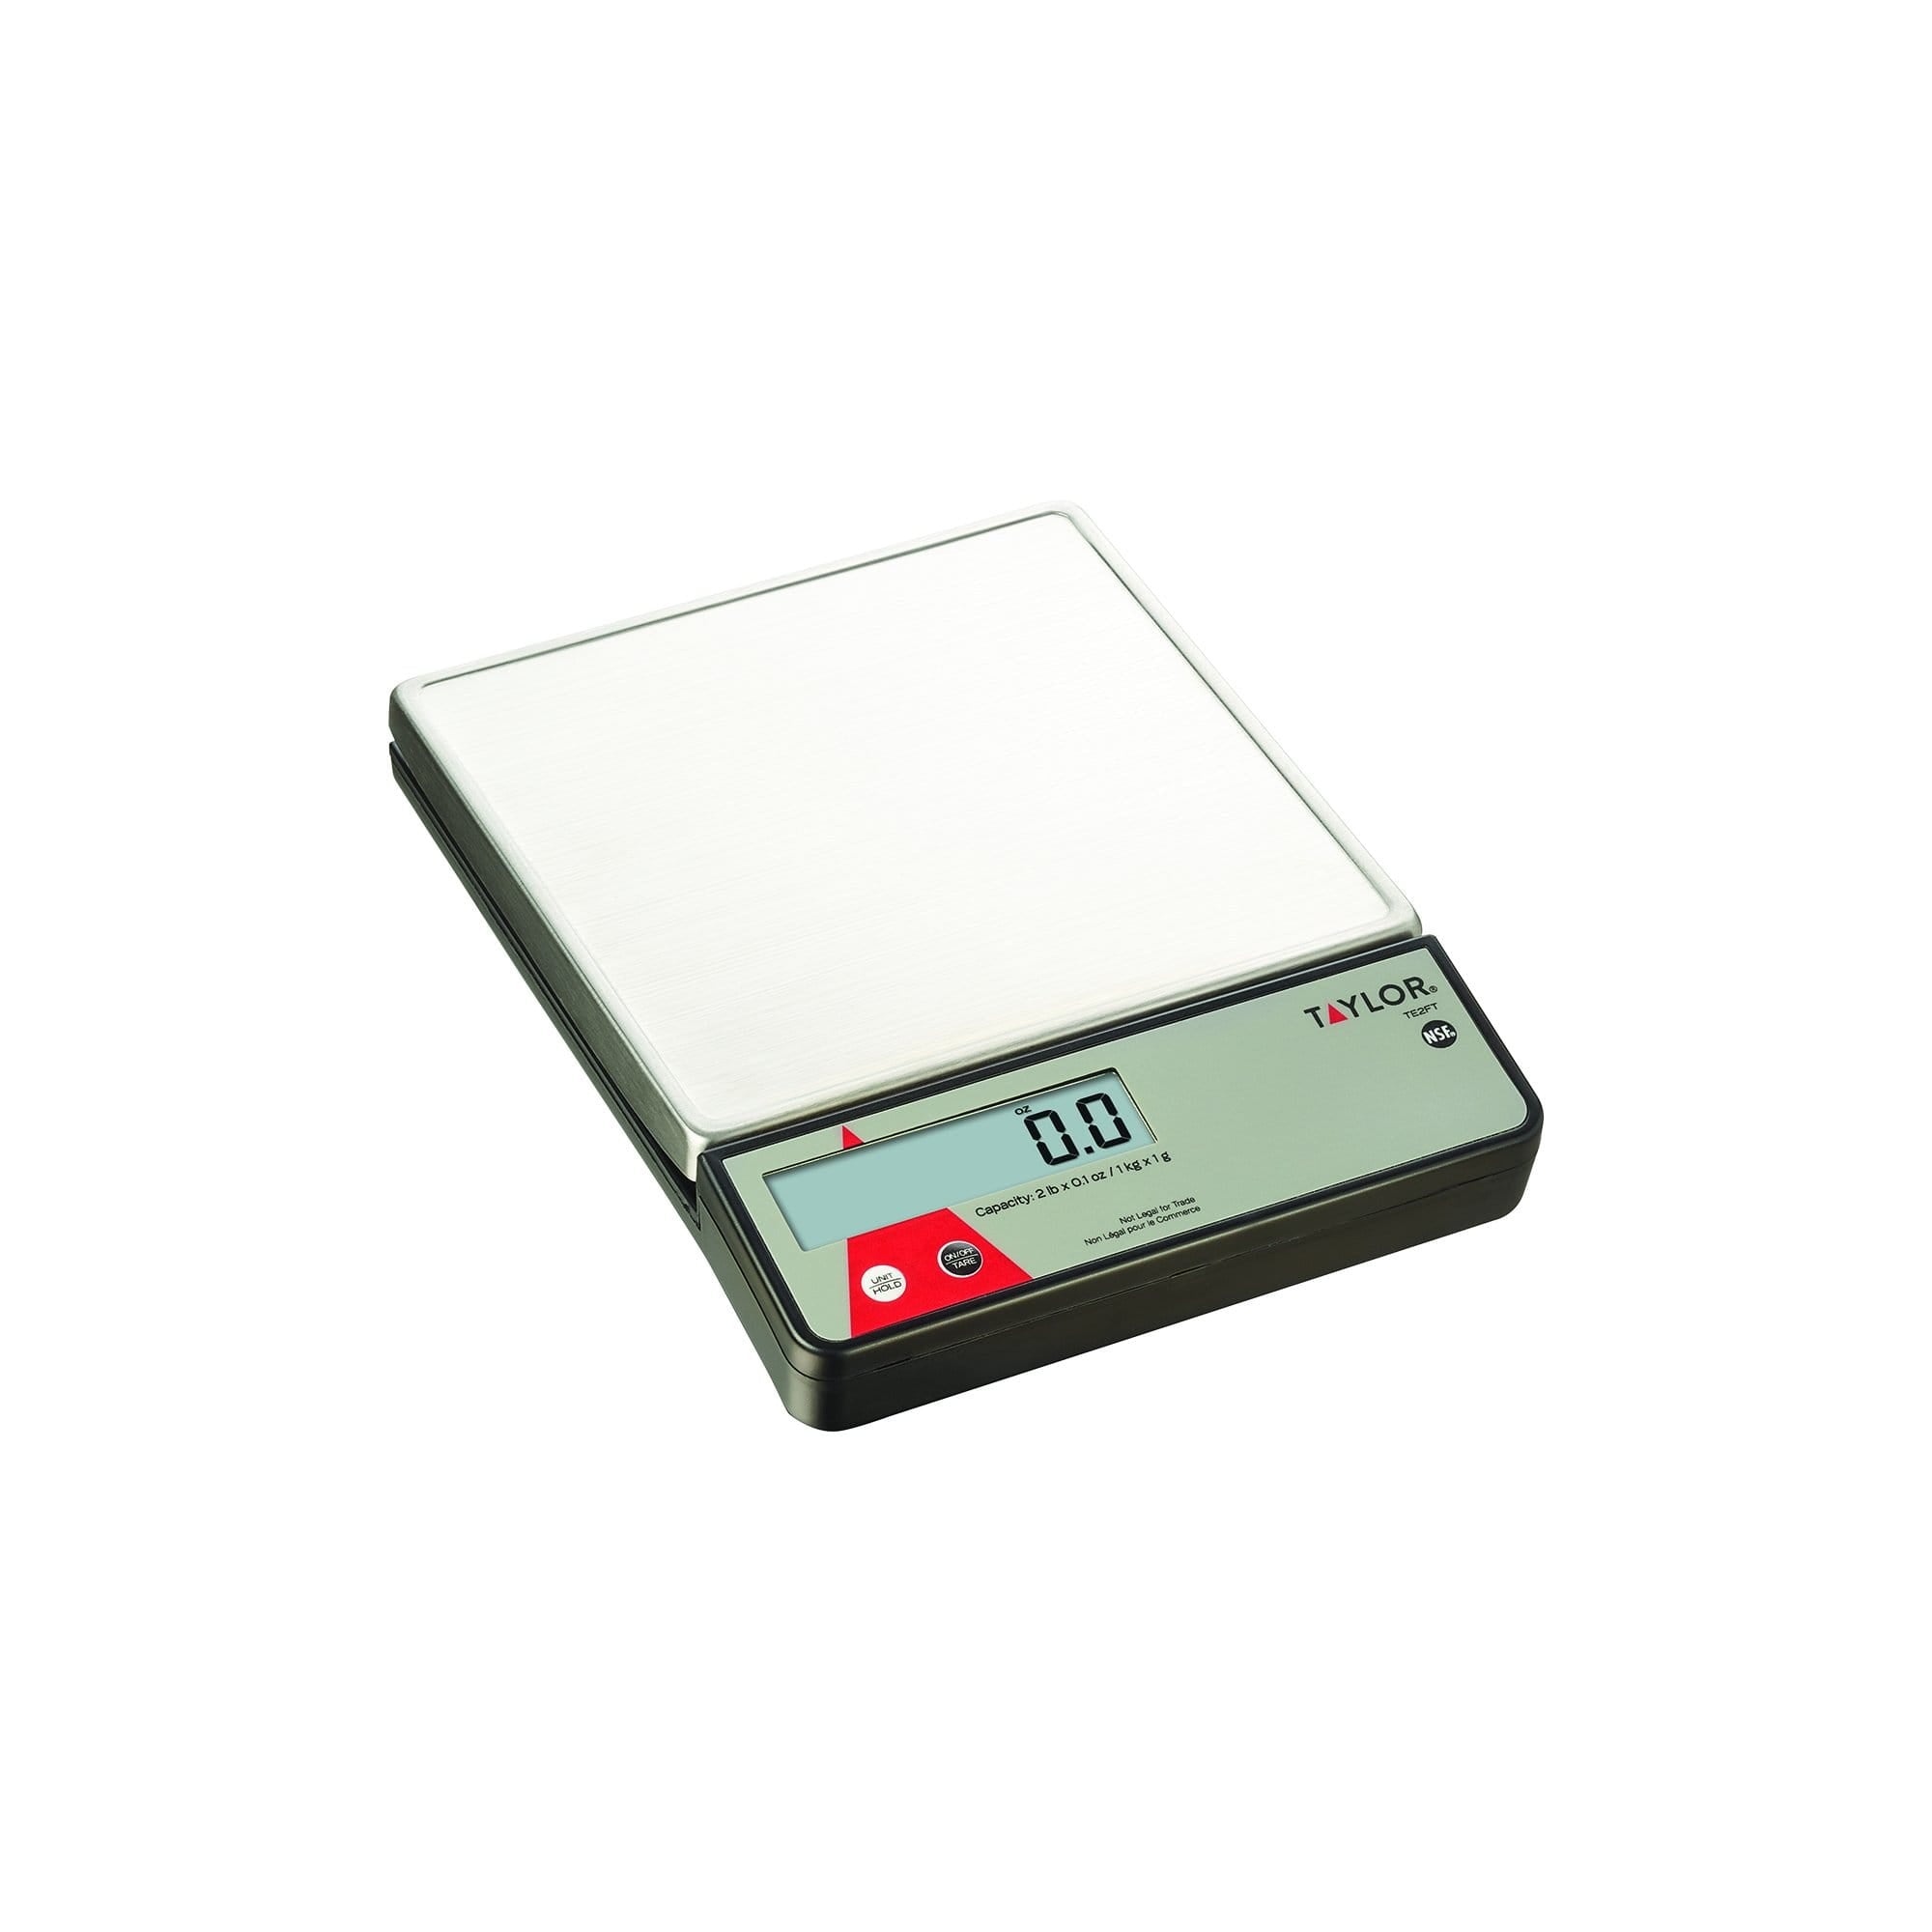 Household small scale 1 small kitchen weighing scale kitchen scale 1kg  scales food scale equipment